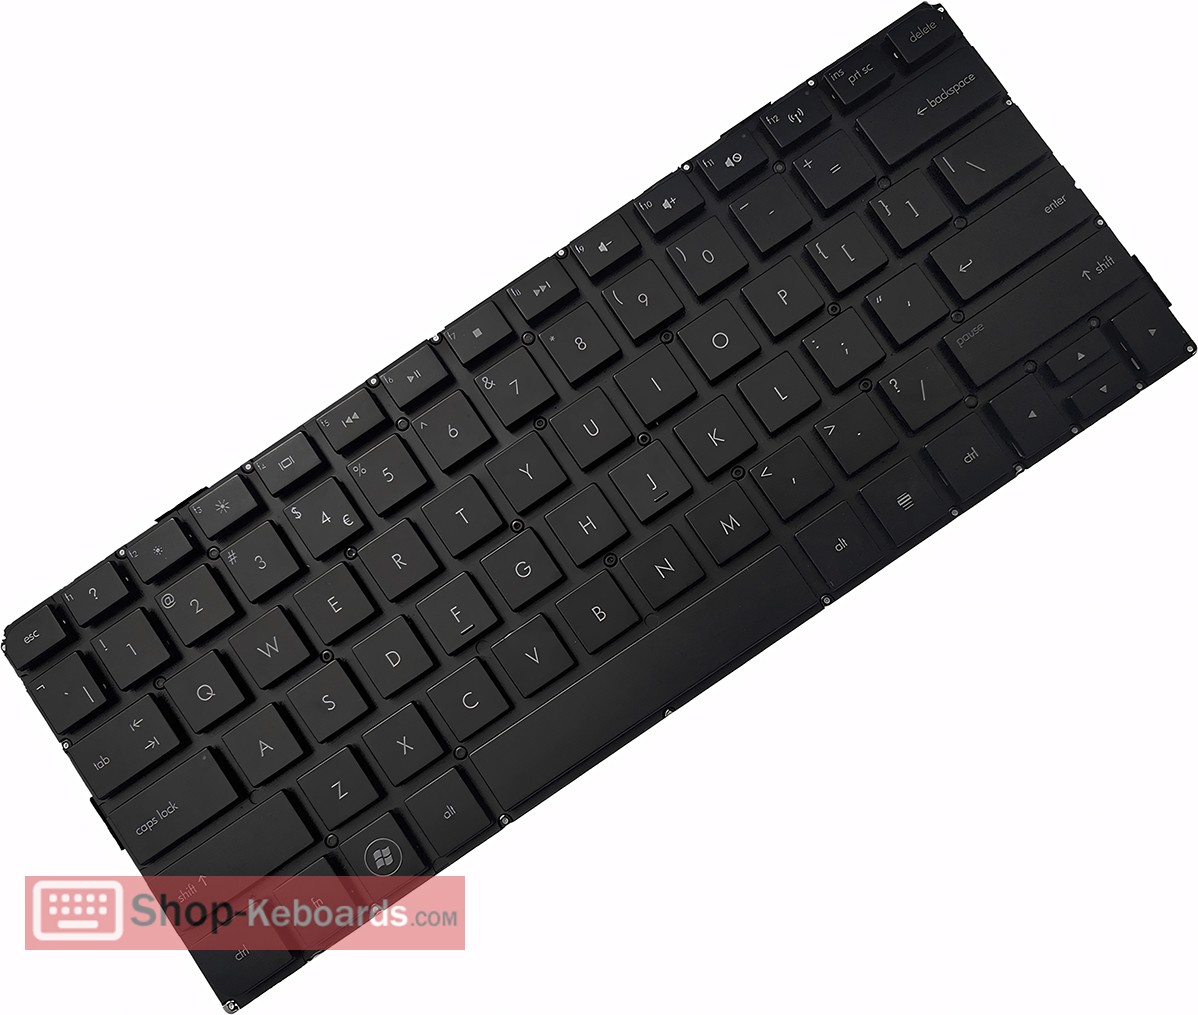 HP ENVY 13-1150 SERIES Keyboard replacement